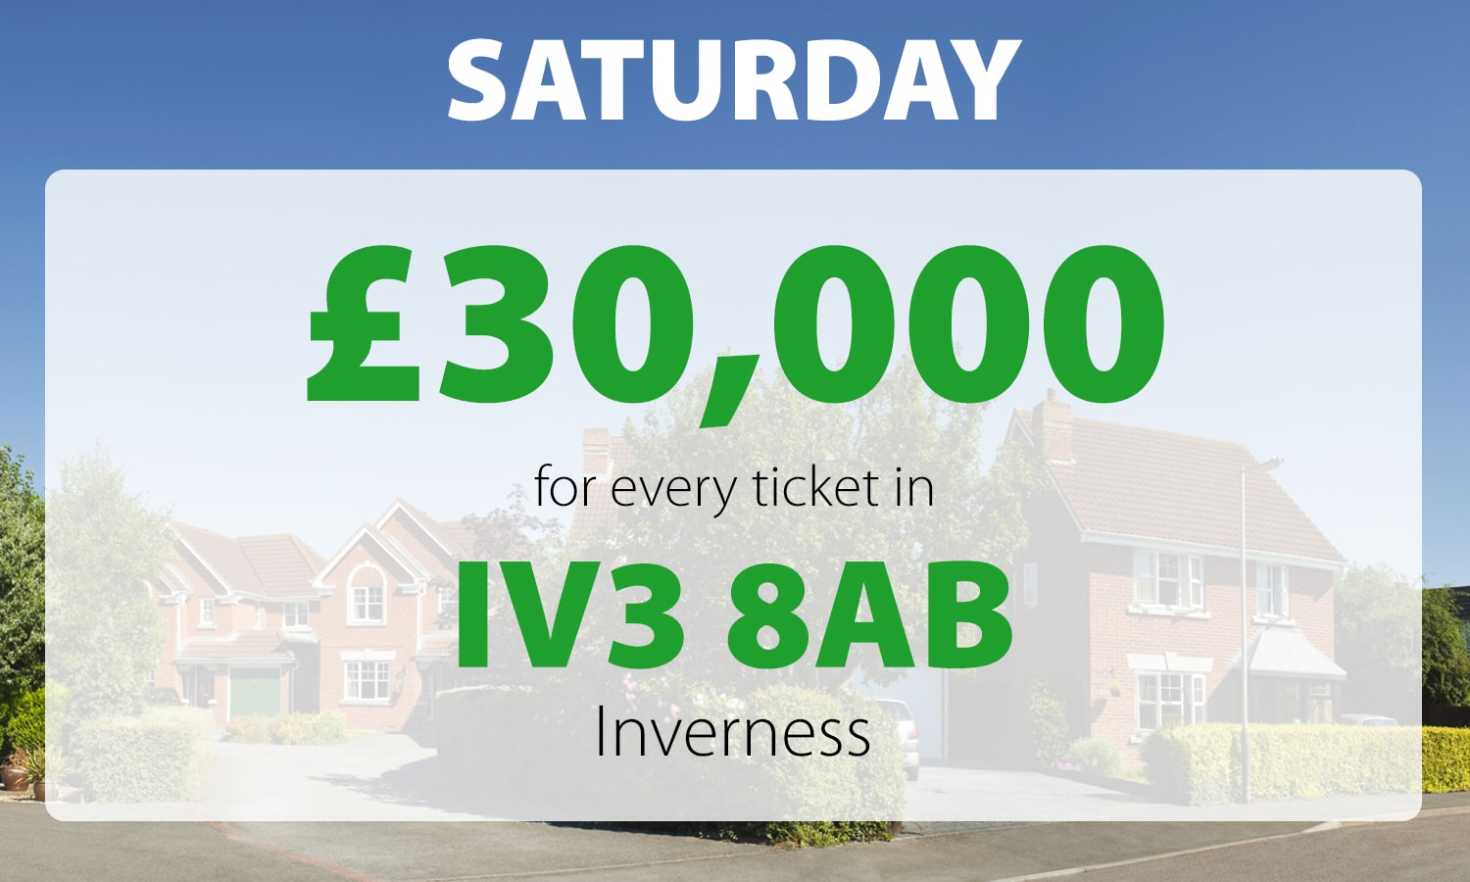 A lucky winner from Inverness has scooped £30,000 in Saturday's Street Prize